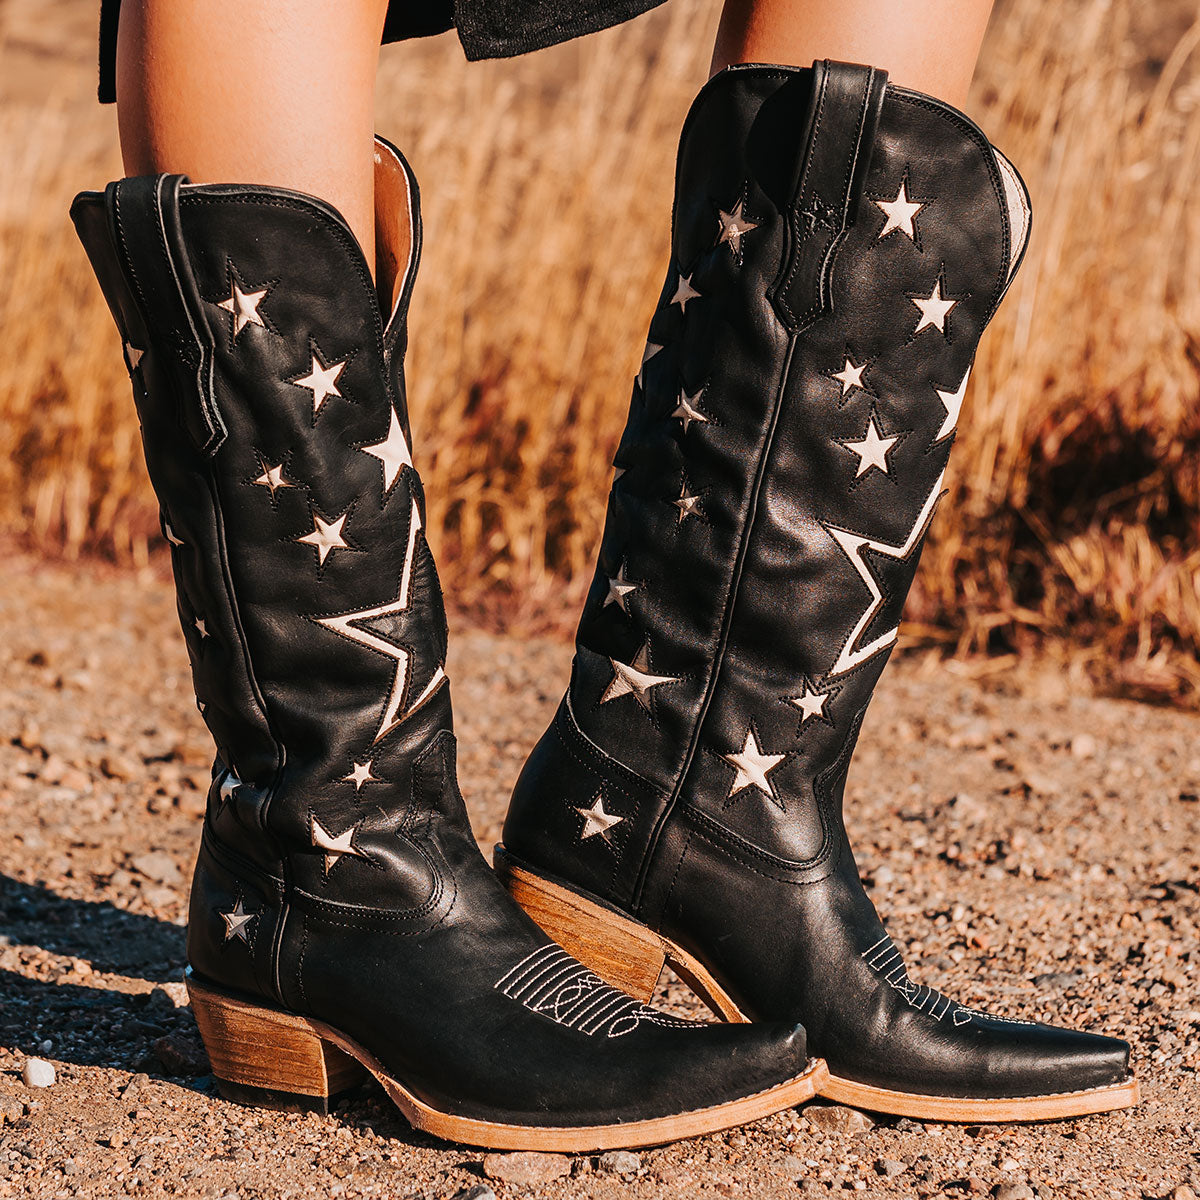 FREEBIRD women's Starzz back multi leather cowboy boot with two-toned leather star inlay detailing traditional stitching and snip toe construction